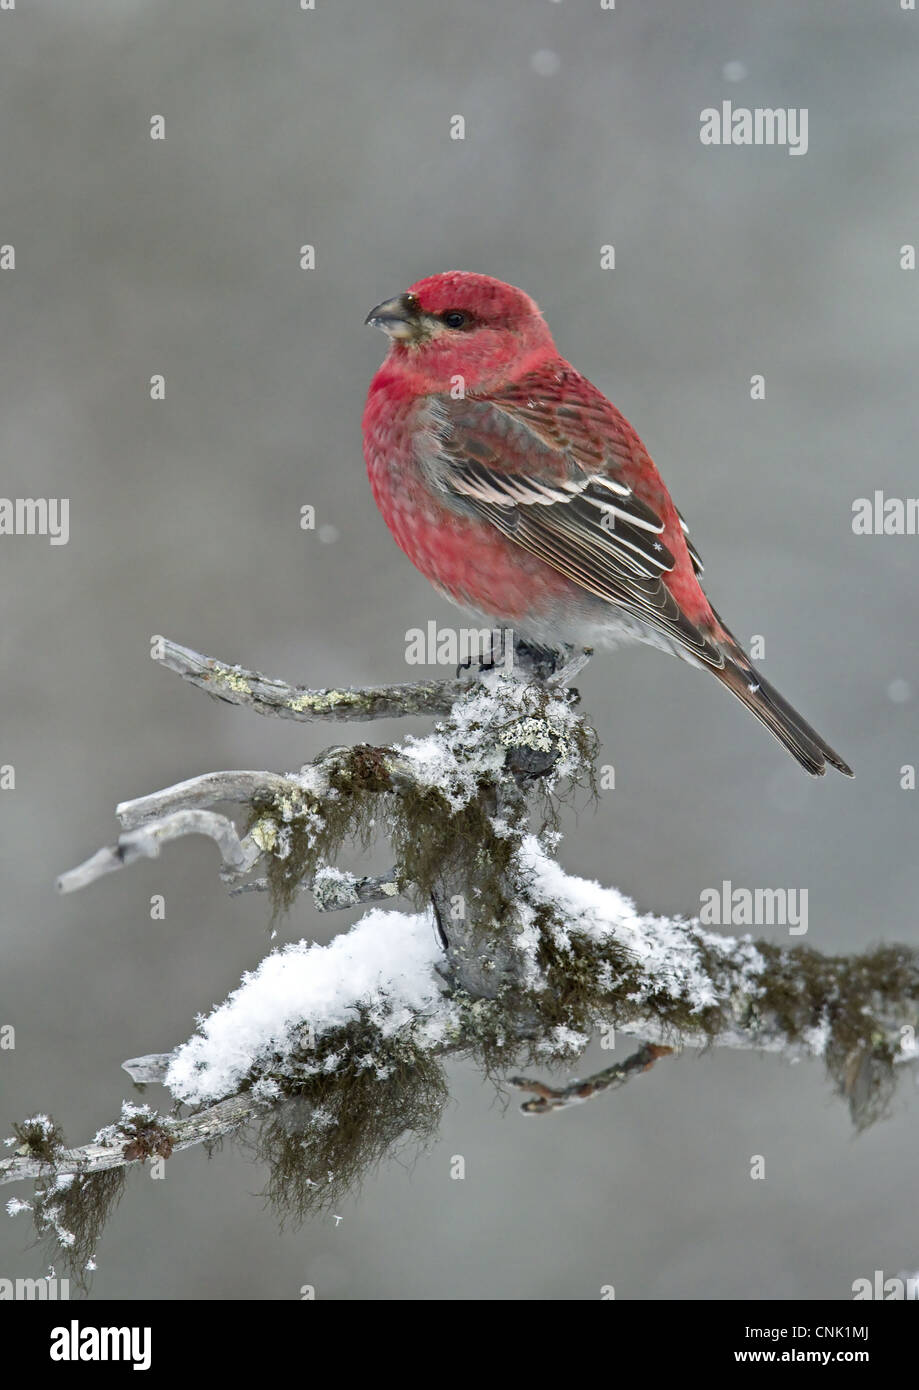 Pine Grosbeak (Pinicola enucleator) adult male, perched on snow and lichen covered branch, Lapland, Finland, march Stock Photo